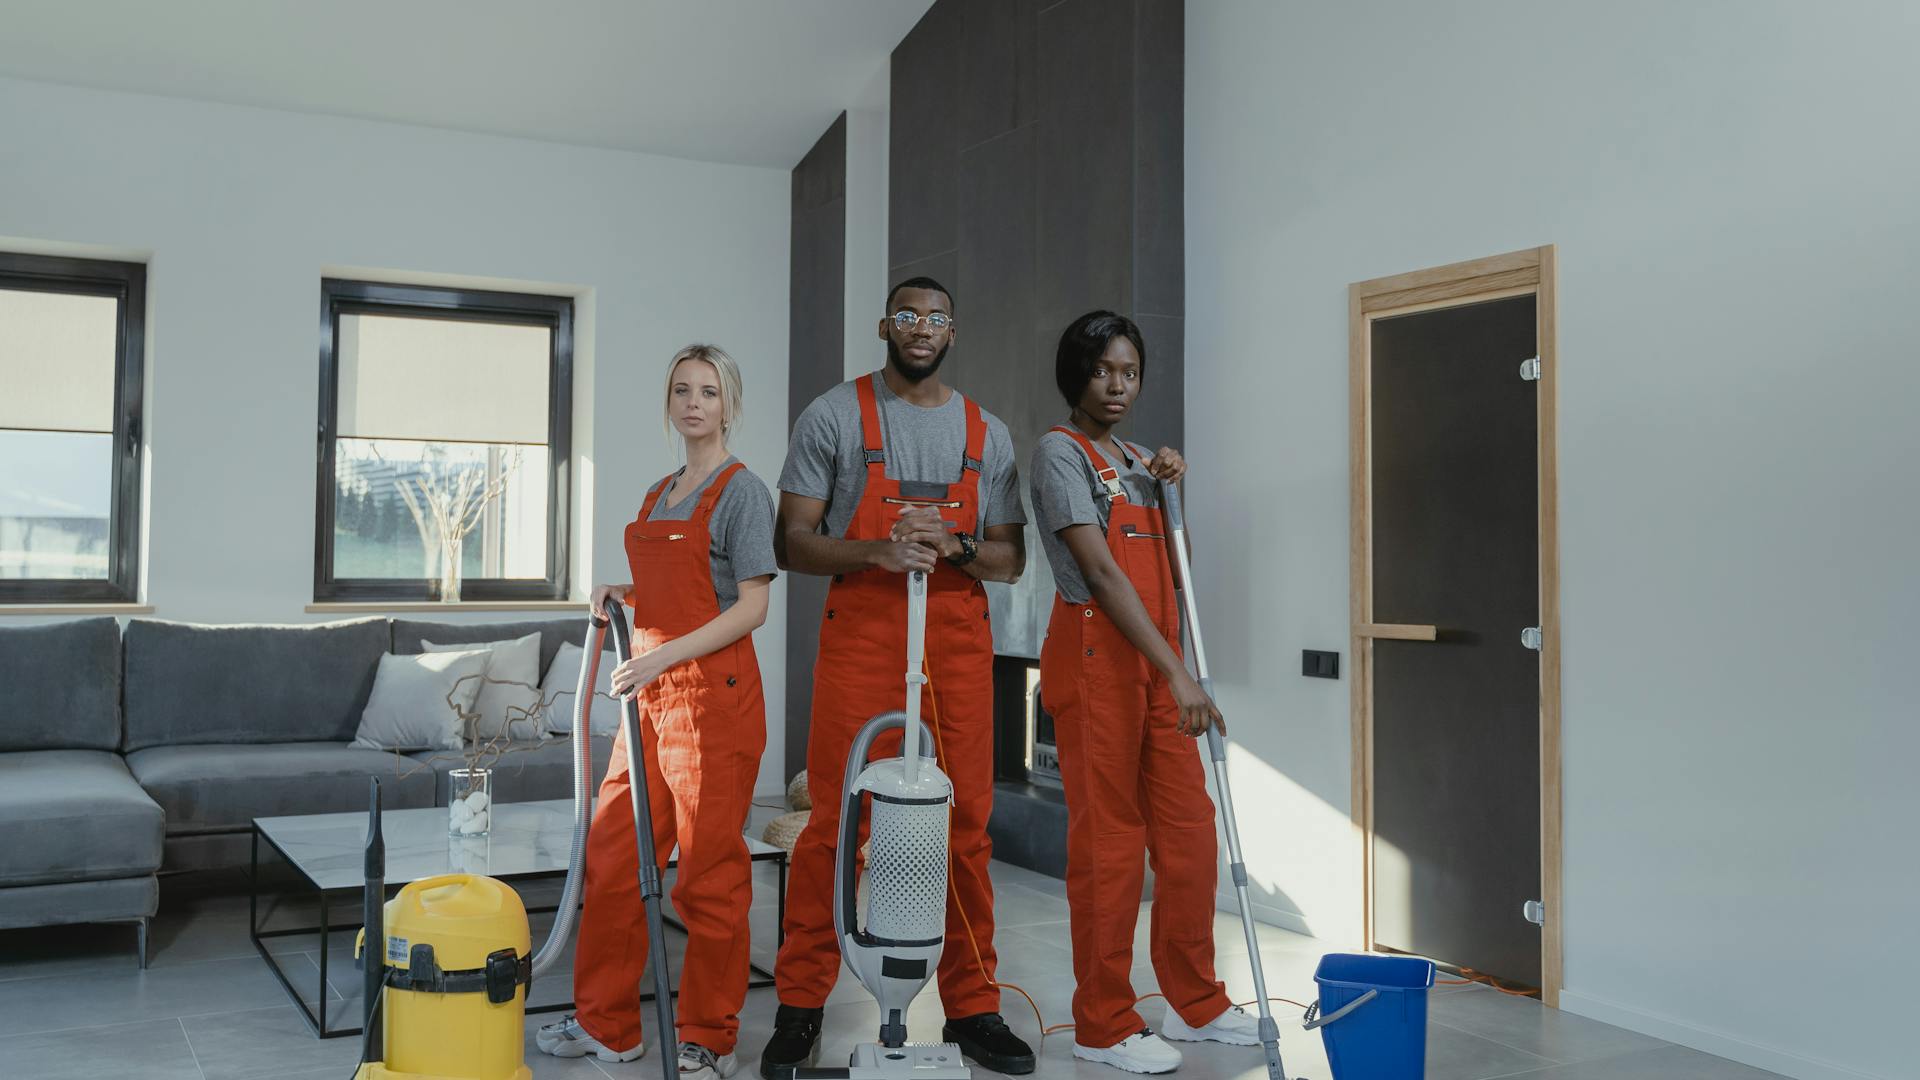 A team of professional Cleaners in Orange Uniform